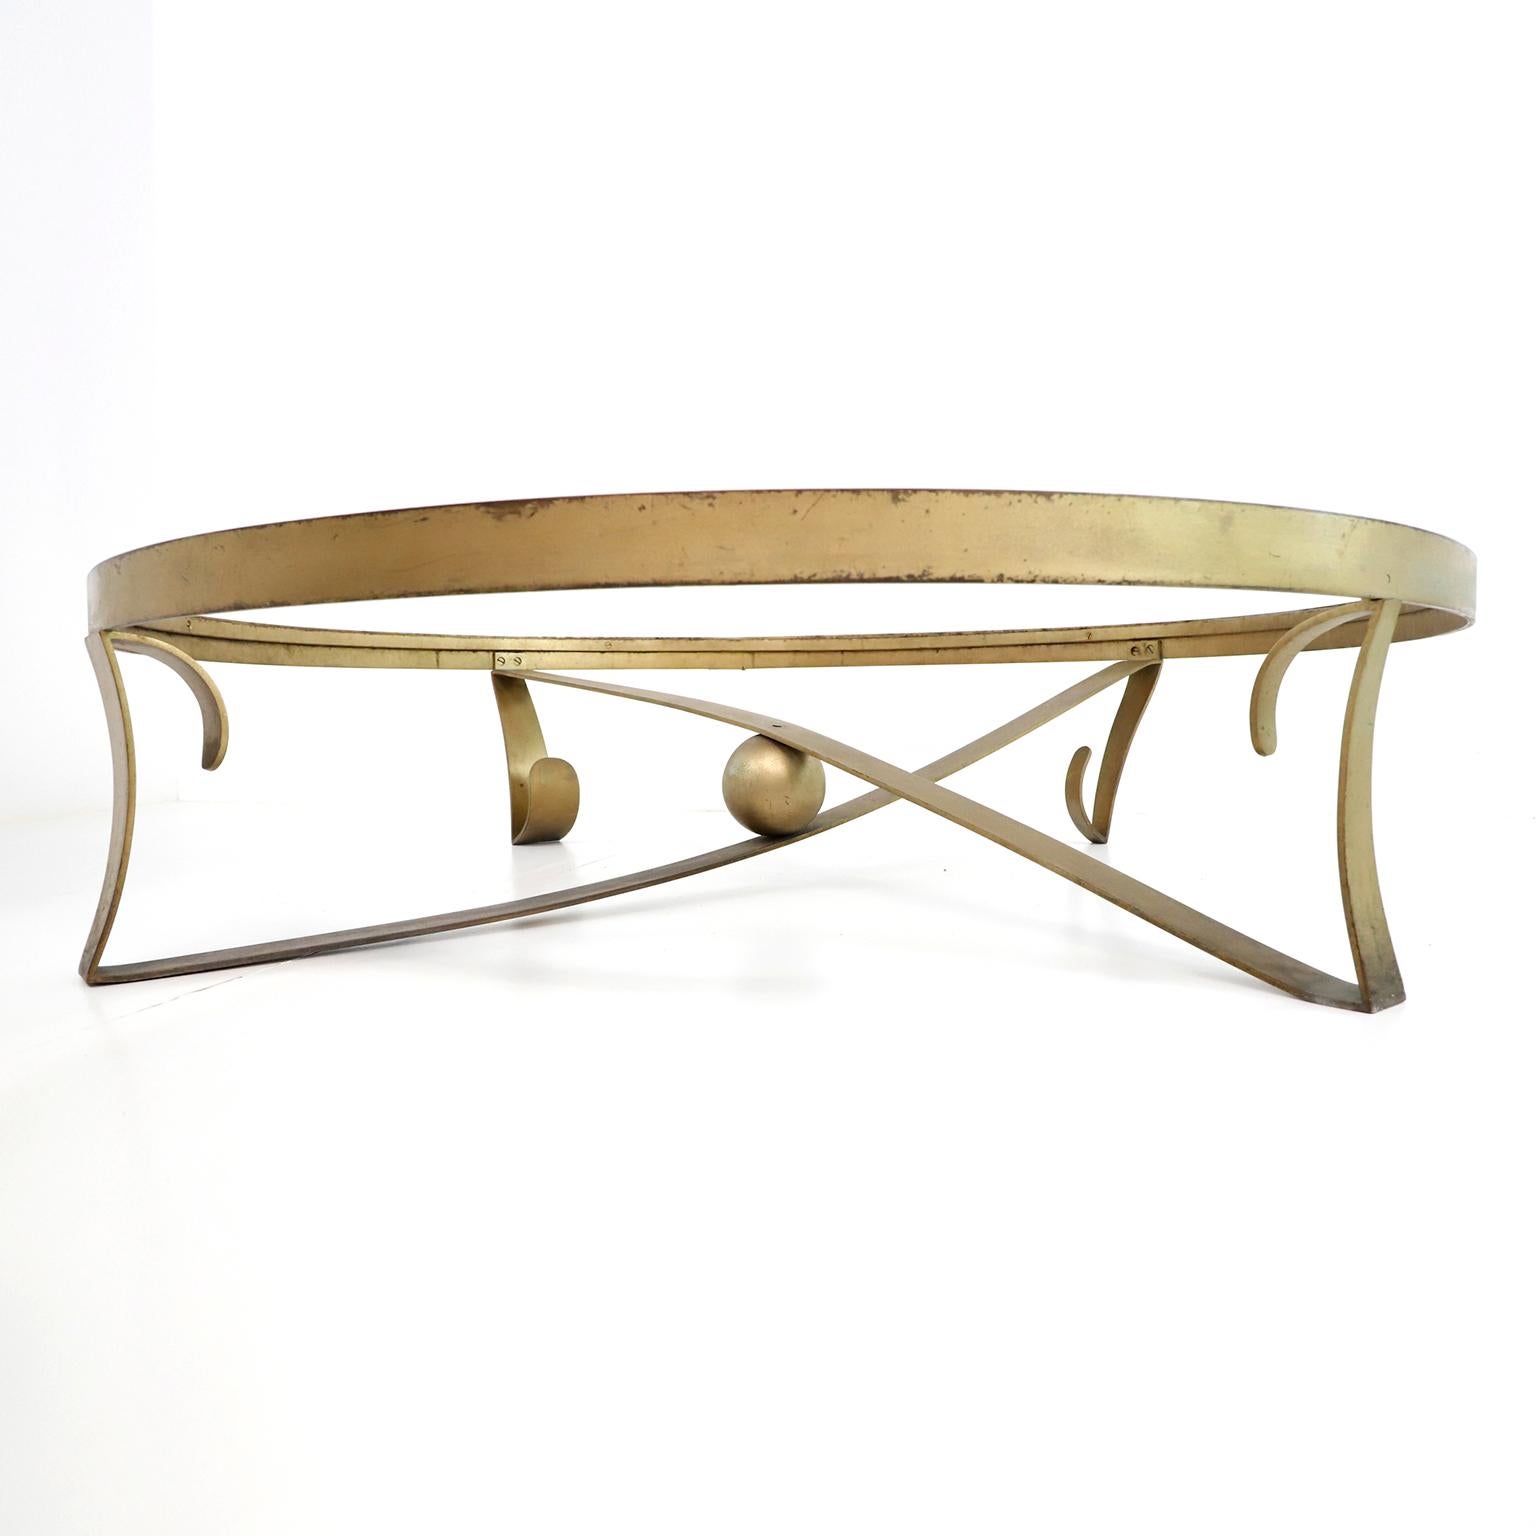 Made in Mexico, circa 1950s, designed by Arturo Pani. We offer this fantastic table in original conditions.